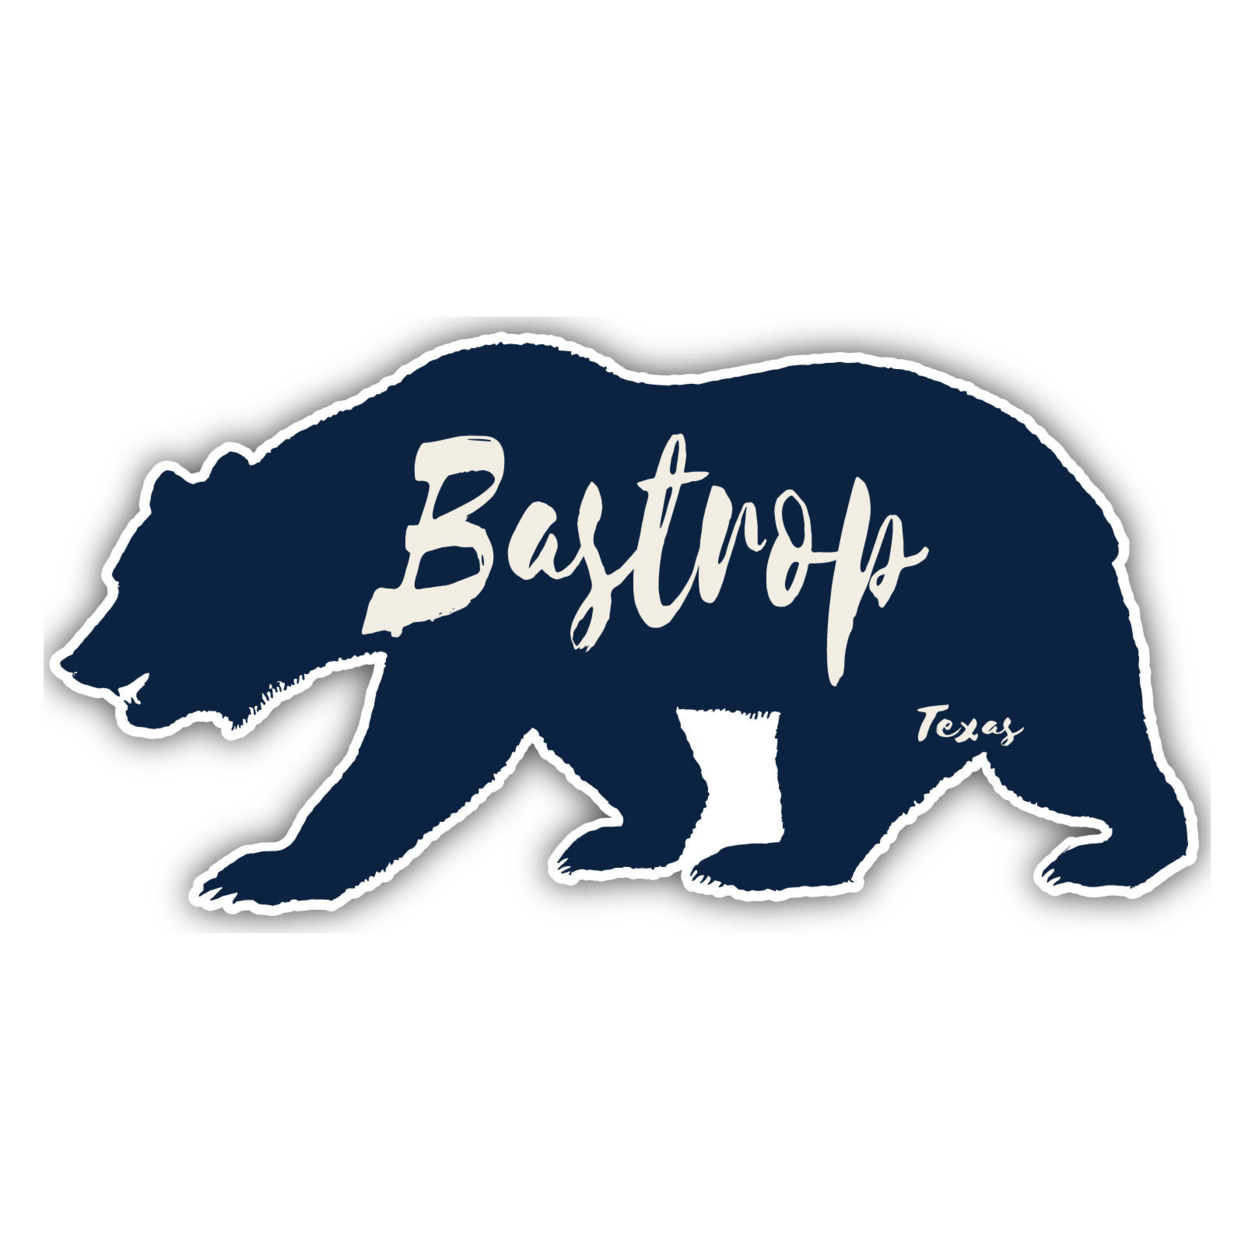 Bastrop Texas Souvenir Decorative Stickers (Choose Theme And Size) - 4-Pack, 8-Inch, Bear